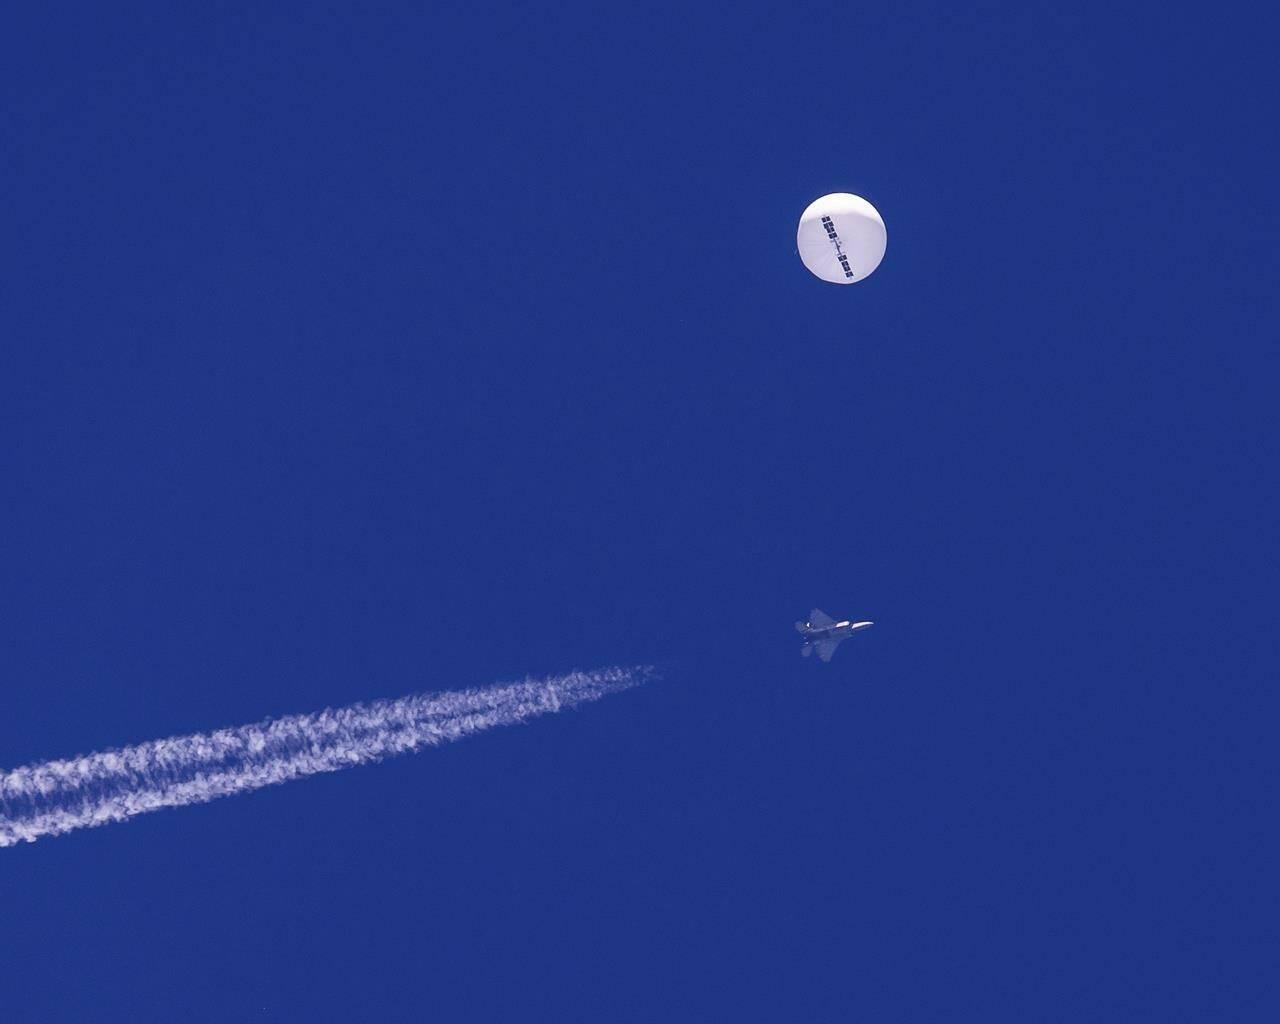 FILE - In this photo provided by Chad Fish, a large balloon drifts above the Atlantic Ocean, just off the coast of South Carolina, with a fighter jet and its contrail seen below it, Saturday, Feb. 4, 2023. A missile fired on Feb. 5 by a U.S. F-22 off the Carolina coast ended the days-long flight of what the Biden administration says was a surveillance operation that took the Chinese balloon near U.S. military sites. (Chad Fish via AP)